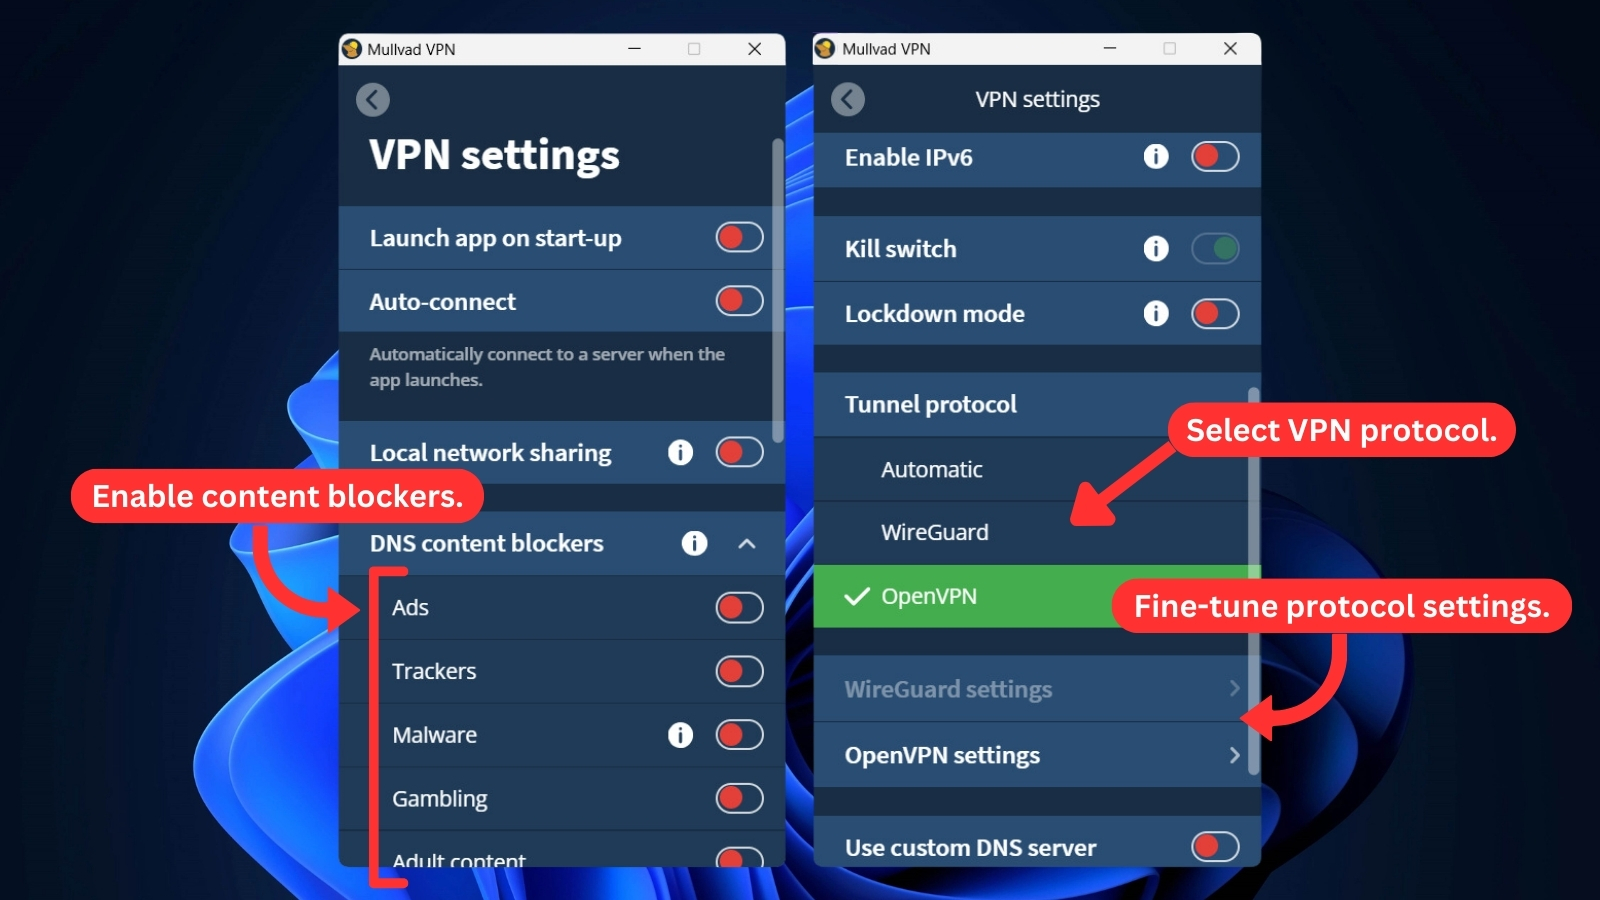 How to fine-tune Mullvad VPN settings